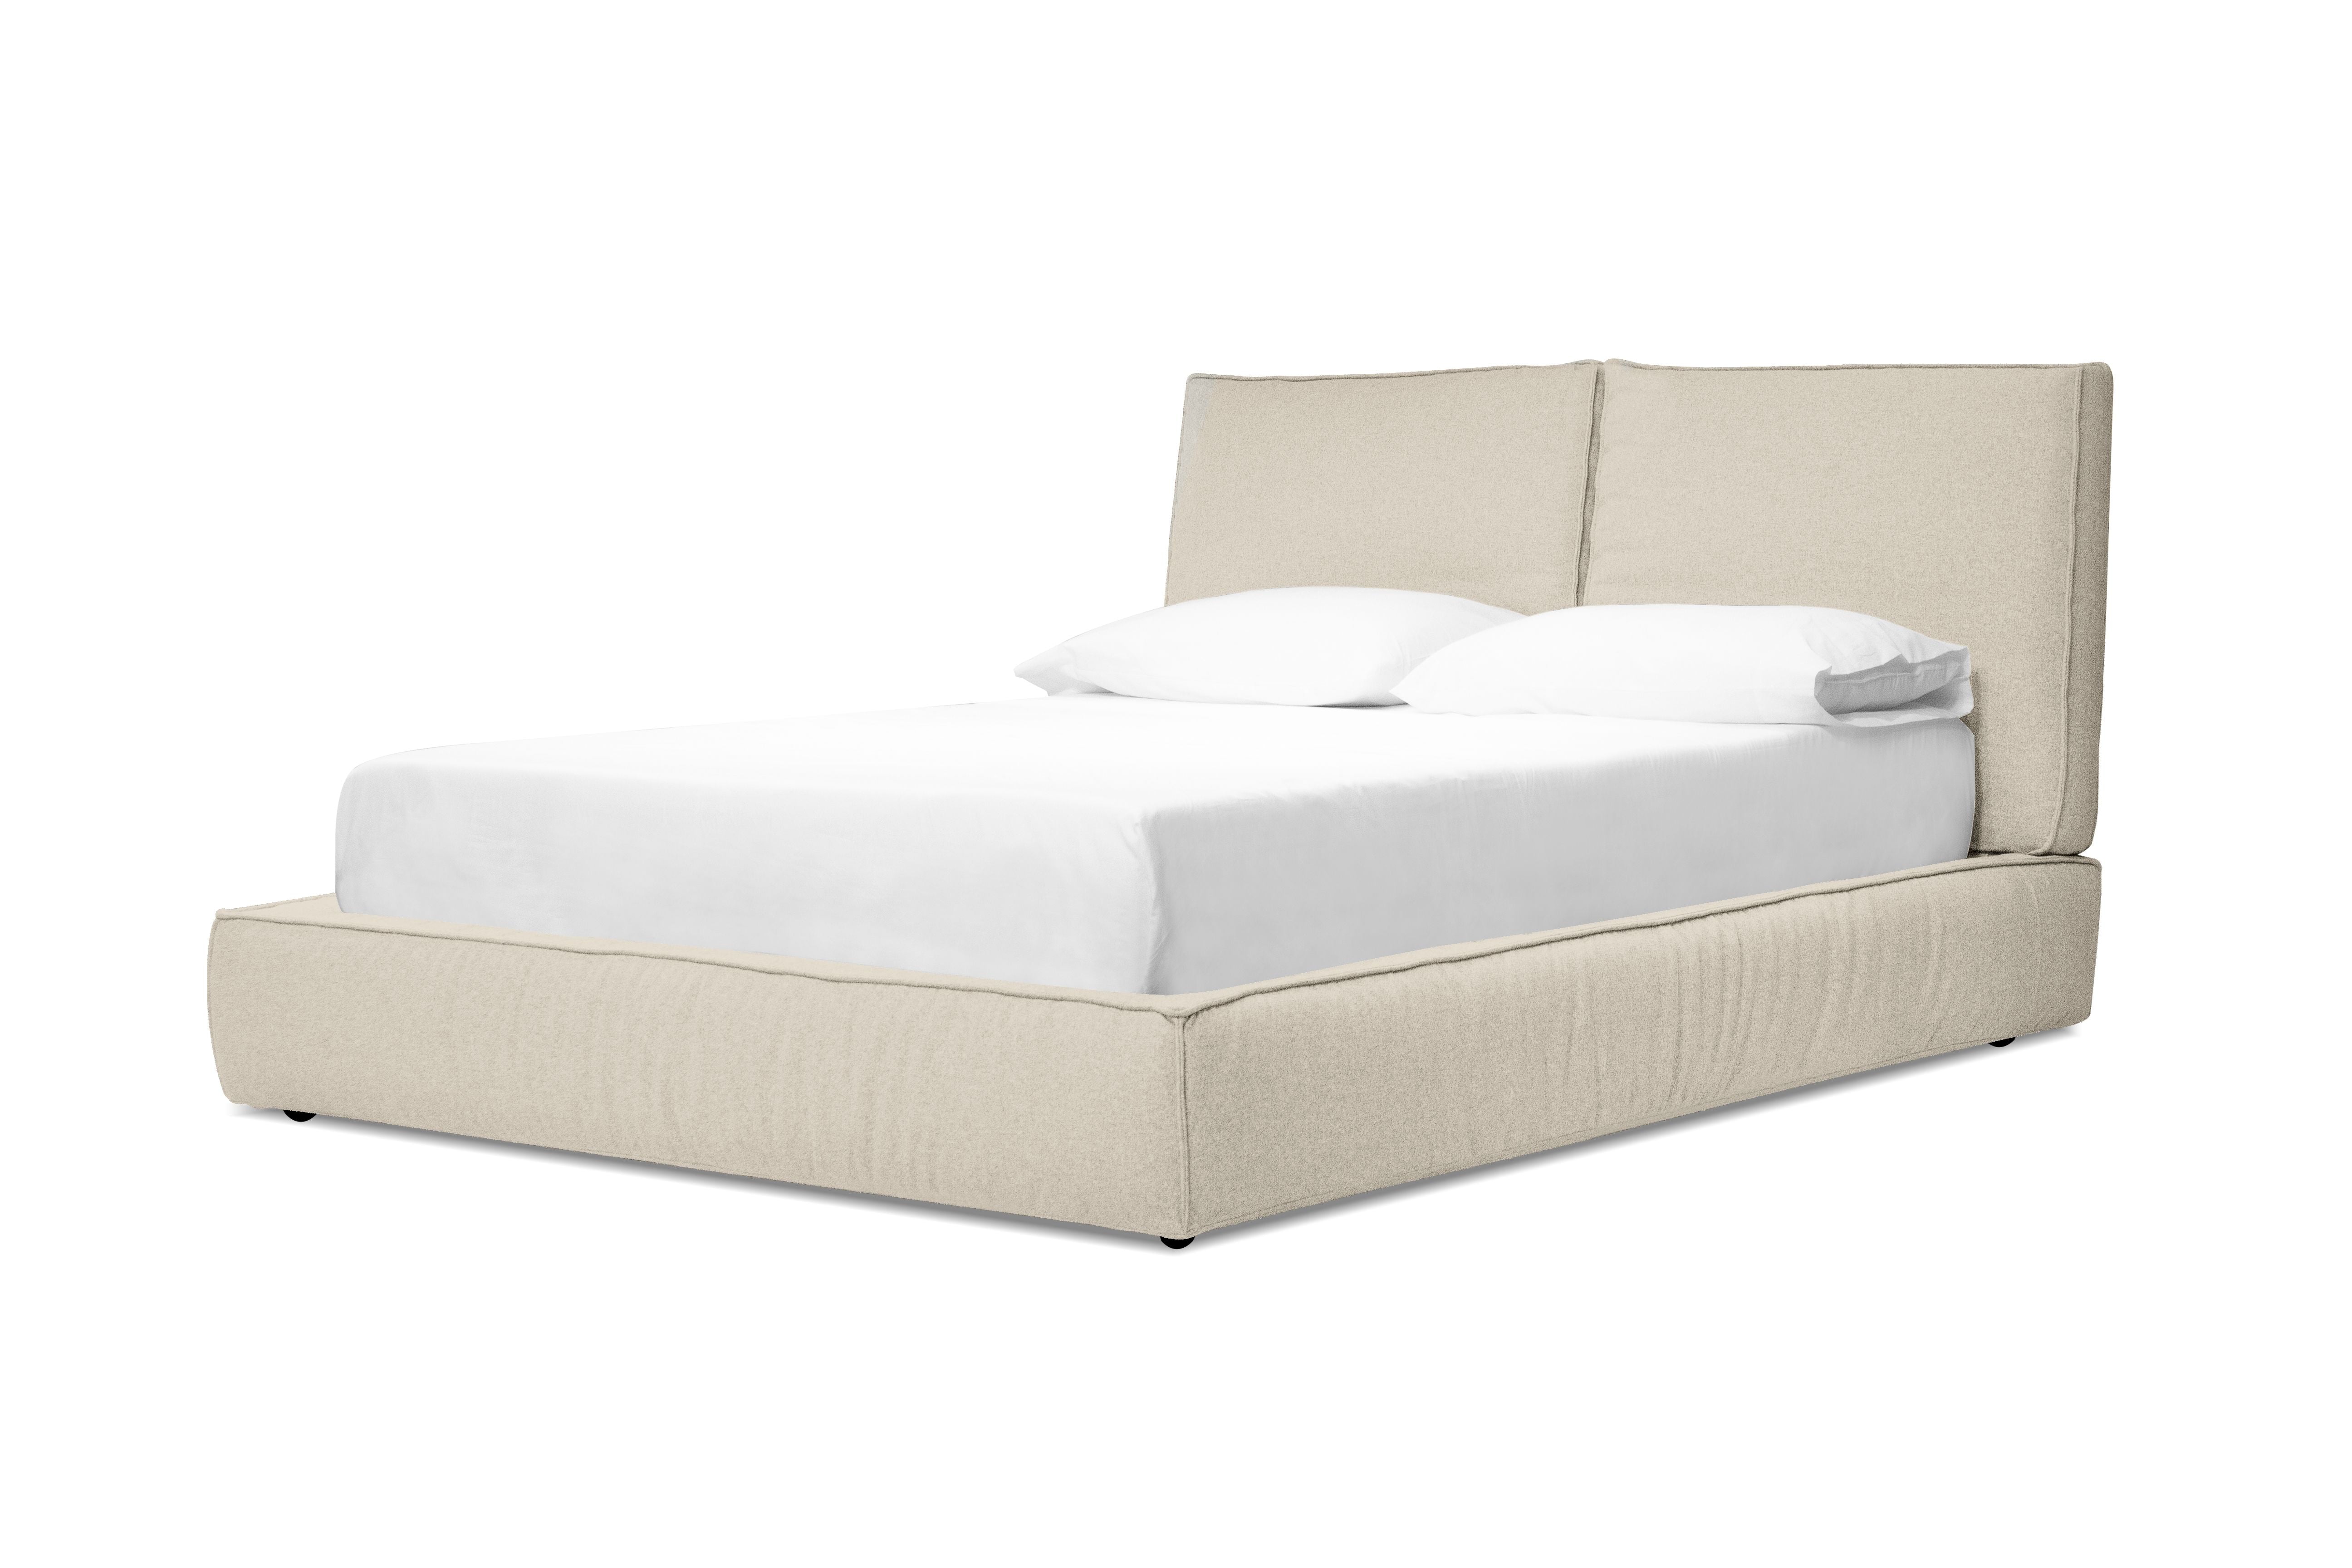 //mobital.ca/cdn/shop/products/BED-BEND-ALMO-QUEEN.png?v=1712260811&width=360 360w,//mobital.ca/cdn/shop/products/BED-BEND-ALMO-QUEEN.png?v=1712260811&width=375 375w,//mobital.ca/cdn/shop/products/BED-BEND-ALMO-QUEEN.png?v=1712260811&width=535 535w,//mobital.ca/cdn/shop/products/BED-BEND-ALMO-QUEEN.png?v=1712260811&width=750 750w,//mobital.ca/cdn/shop/products/BED-BEND-ALMO-QUEEN.png?v=1712260811&width=1024 1024w,//mobital.ca/cdn/shop/products/BED-BEND-ALMO-QUEEN.png?v=1712260811&width=1280 1280w,//mobital.ca/cdn/shop/products/BED-BEND-ALMO-QUEEN.png?v=1712260811&width=1366 1366w,//mobital.ca/cdn/shop/products/BED-BEND-ALMO-QUEEN.png?v=1712260811&width=1440 1440w,//mobital.ca/cdn/shop/products/BED-BEND-ALMO-QUEEN.png?v=1712260811&width=1920 1920w,//mobital.ca/cdn/shop/products/BED-BEND-ALMO-QUEEN.png?v=1712260811&width=2880 2880w